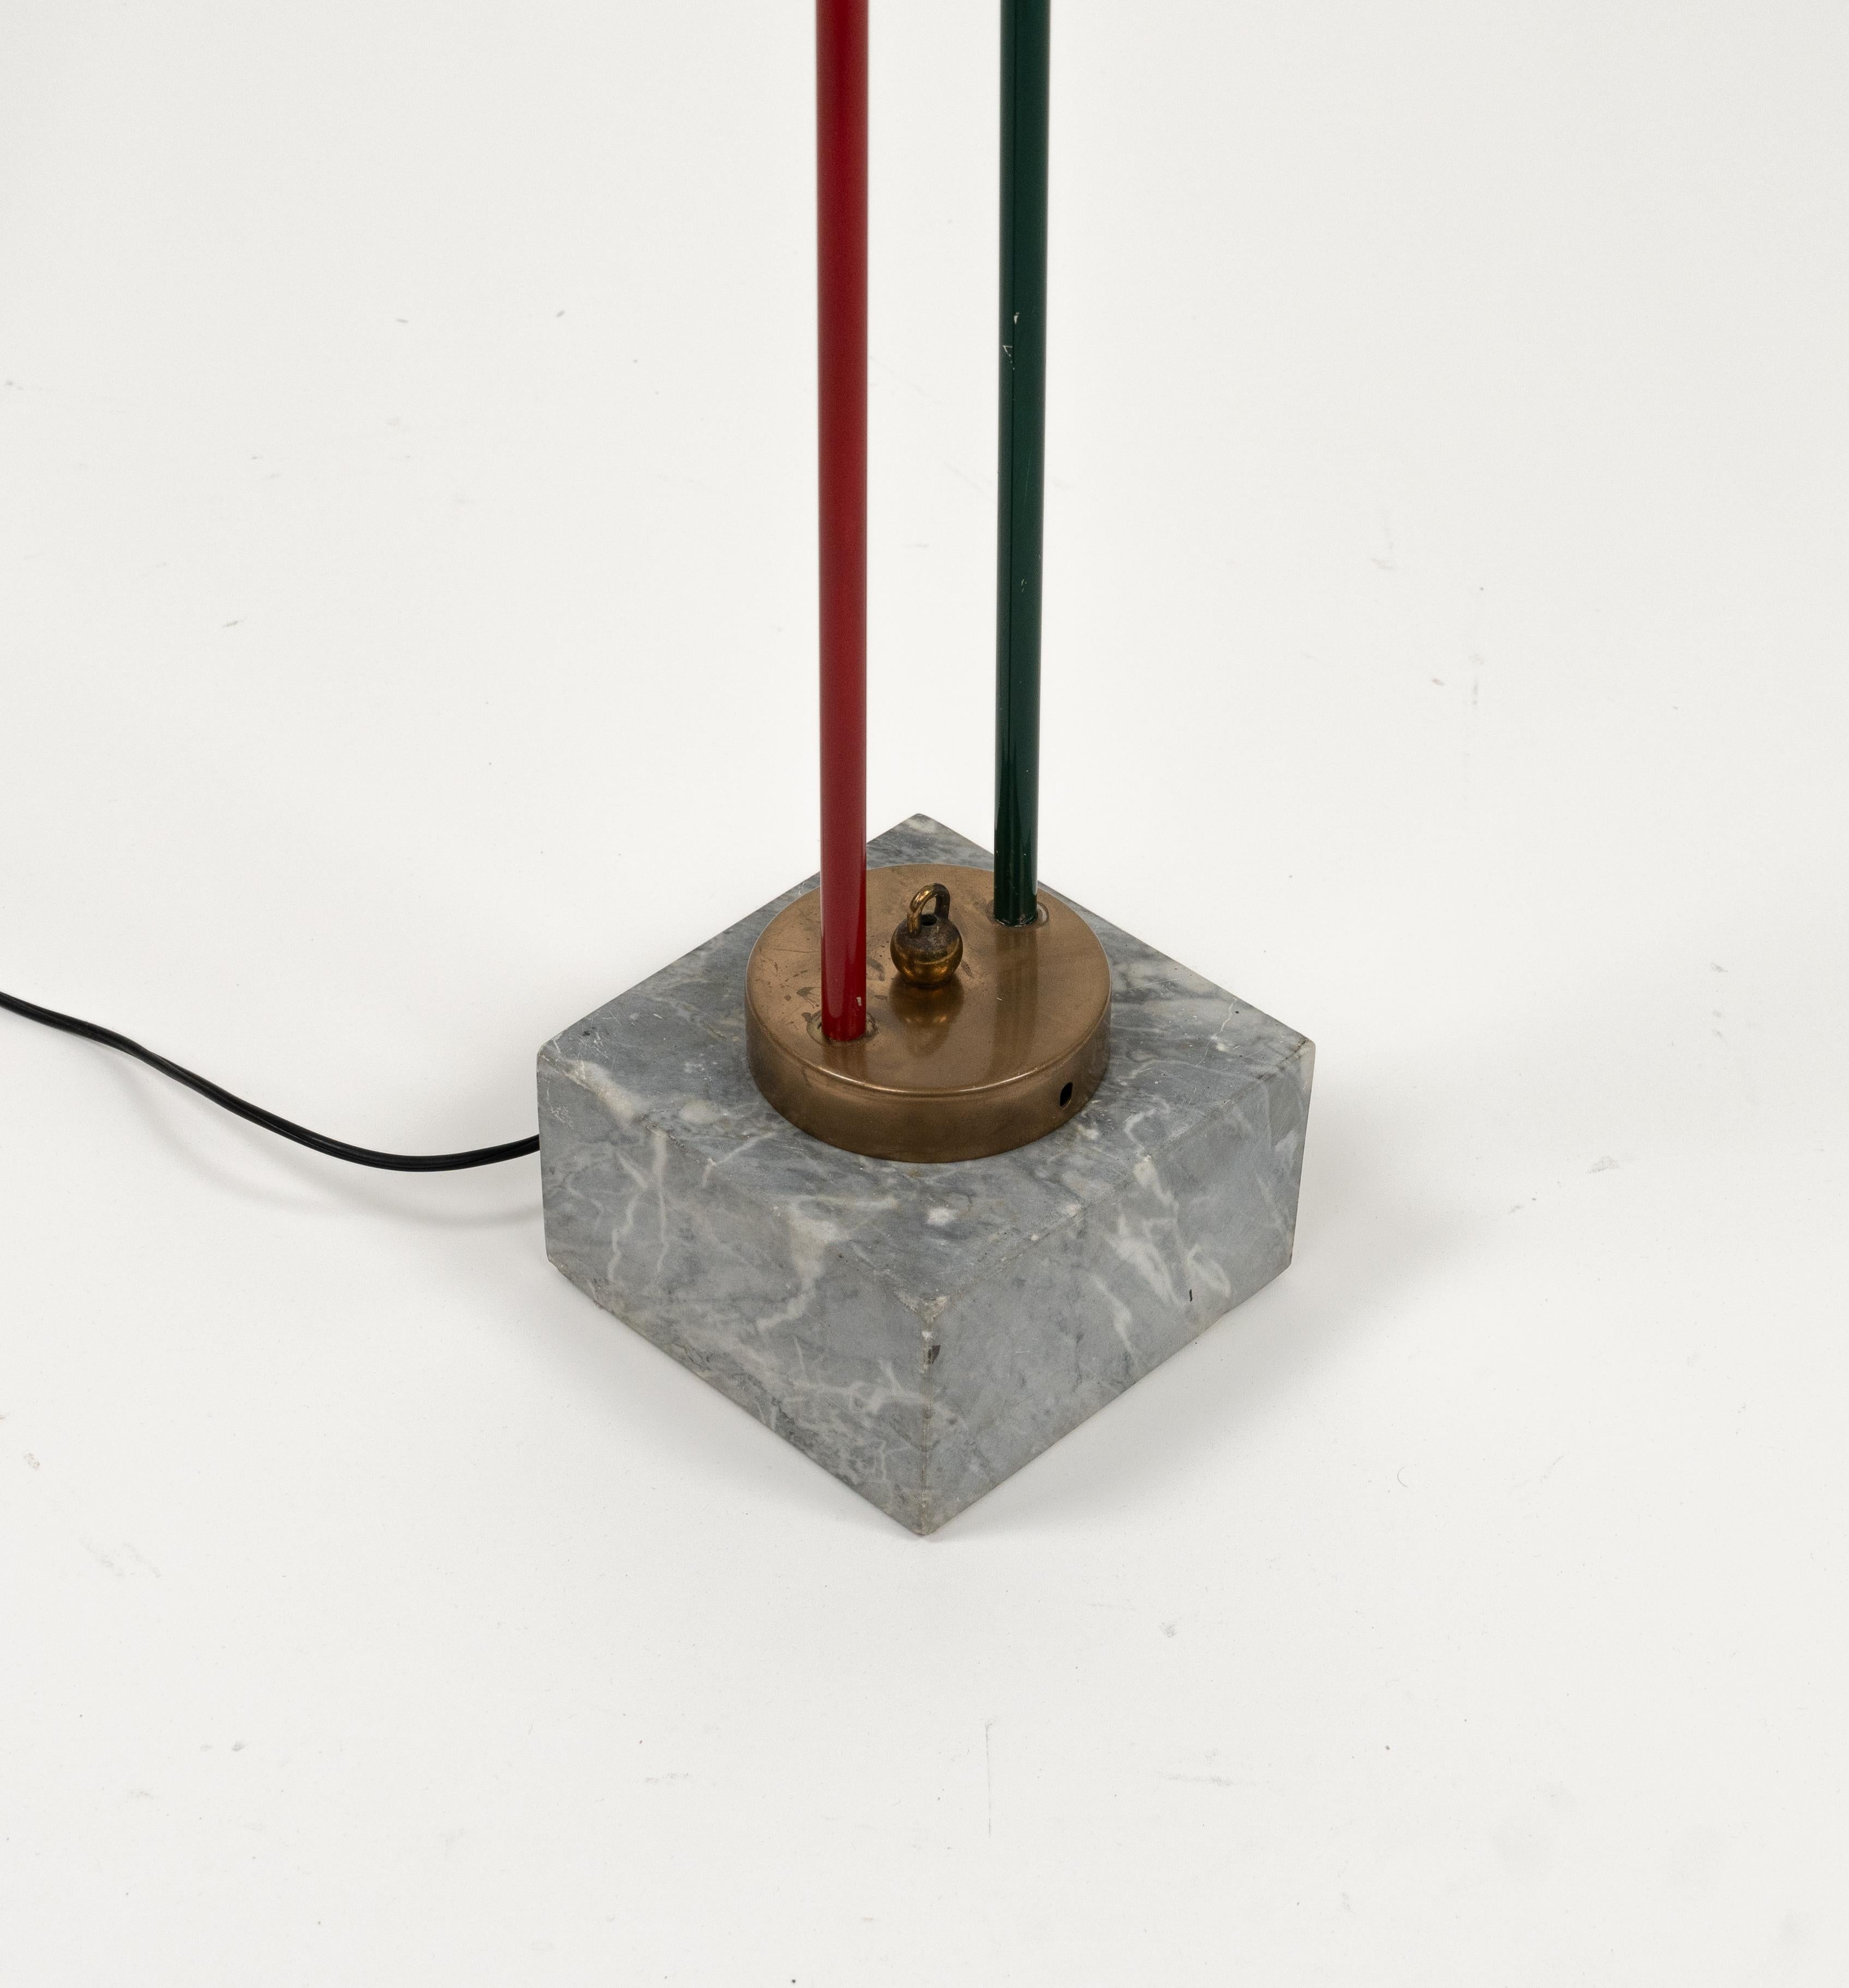 Floor Lamp in Marble, Lacquered Metal and Brass Stilnovo Style, Italy 1950s For Sale 11